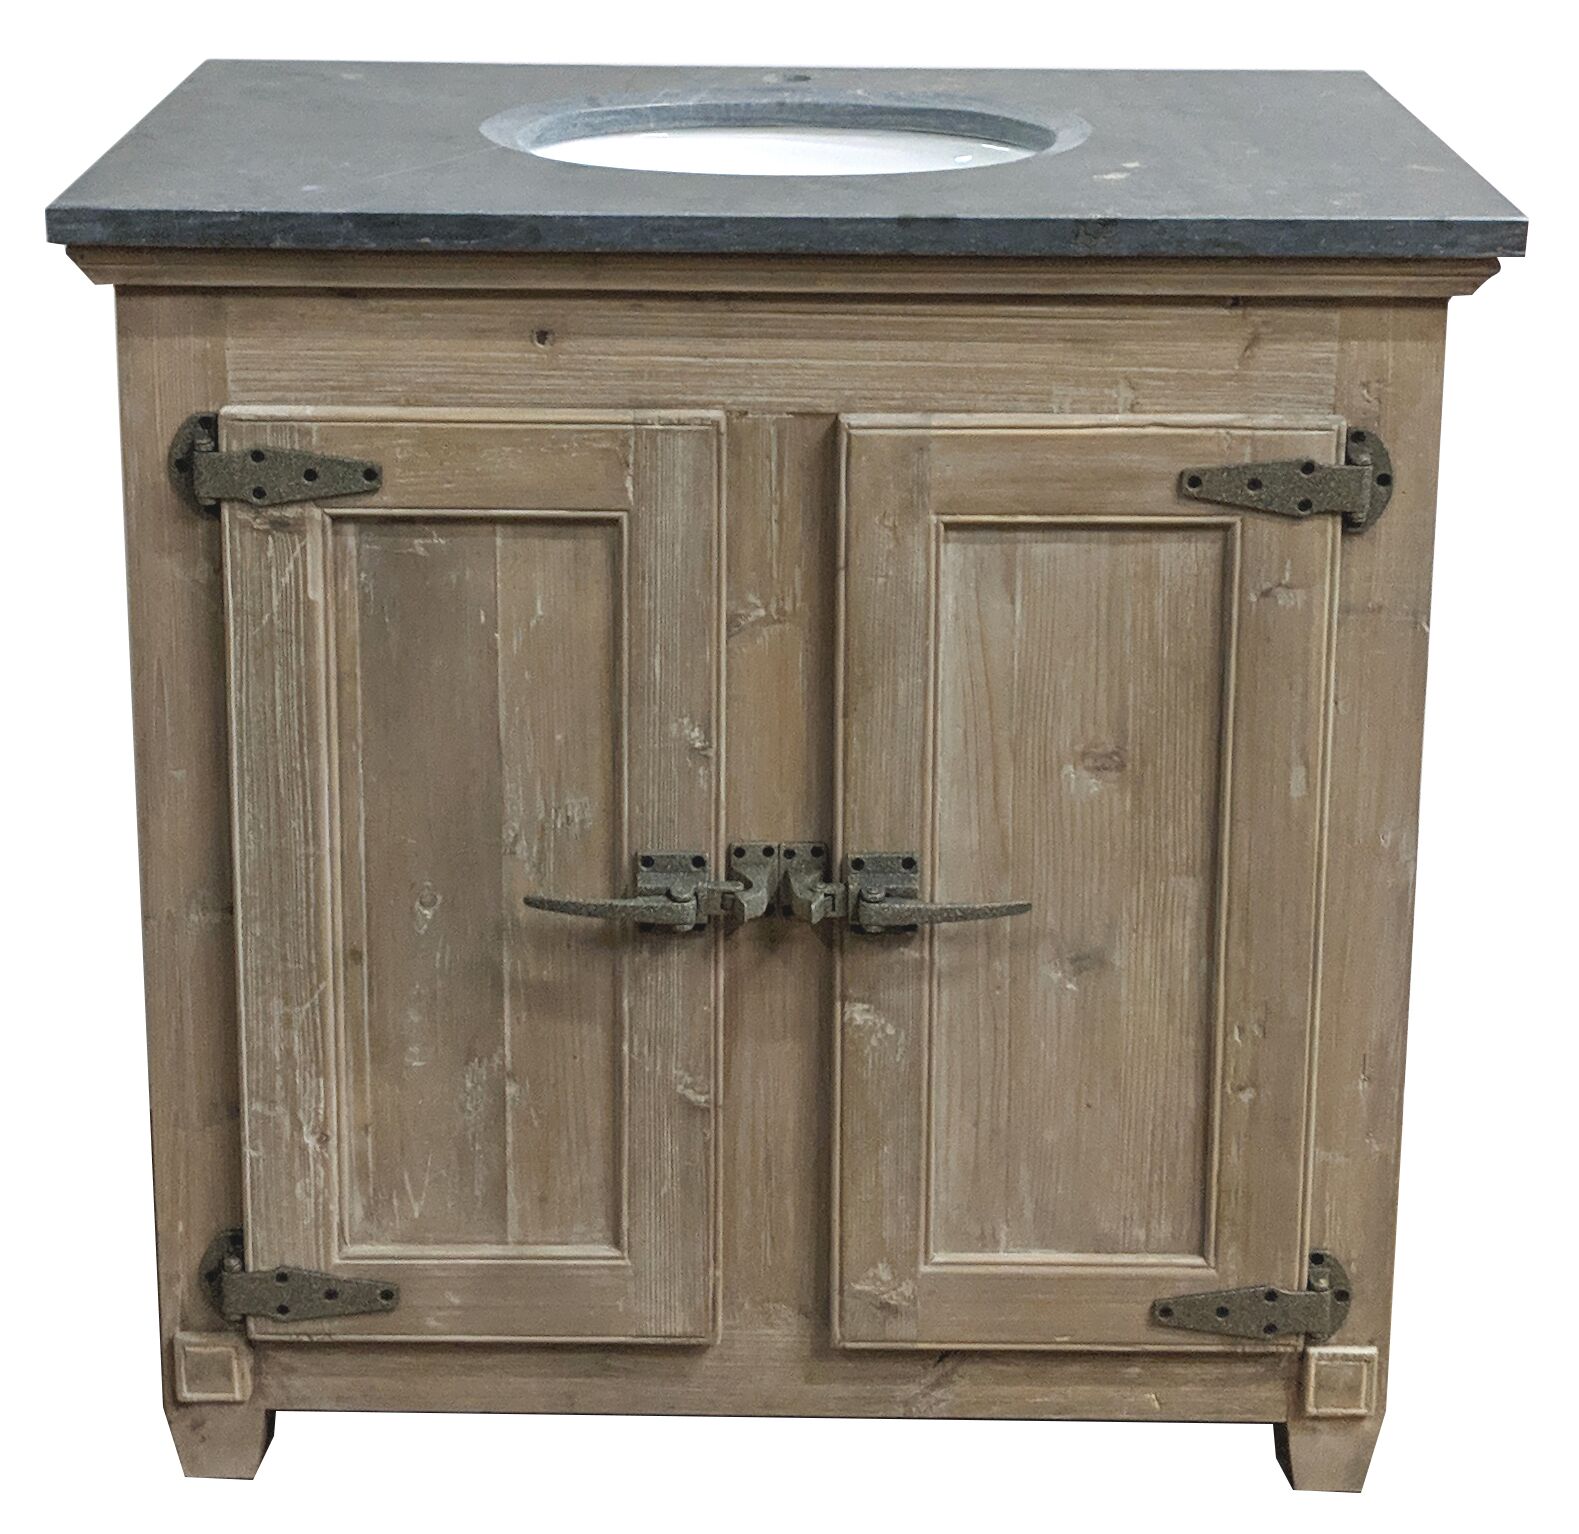 36" Handcrafted Reclaimed Pine Solid Wood Single Vanity Natural Finish